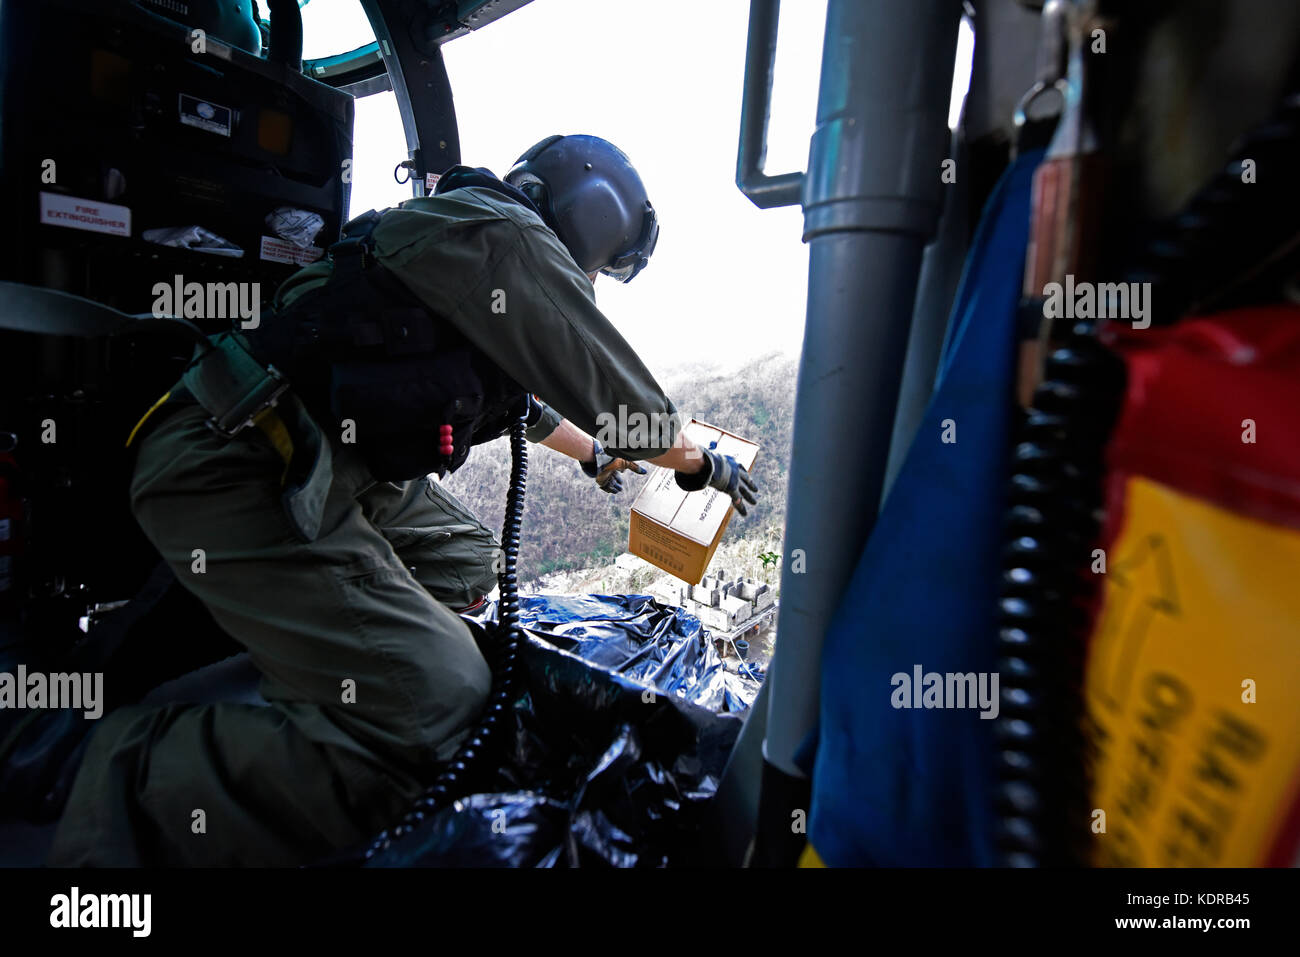 A U.S. Coast Guard officer drops emergency supplies out of a MH-65 Dolphin helicopter to Puerto Rican residents below during relief efforts in the aftermath of Hurricane Maria October 3, 2017 near Utuado, Puerto Rico. The residents were stranded after the hurricane caused mudslides and washed out roads. Stock Photo